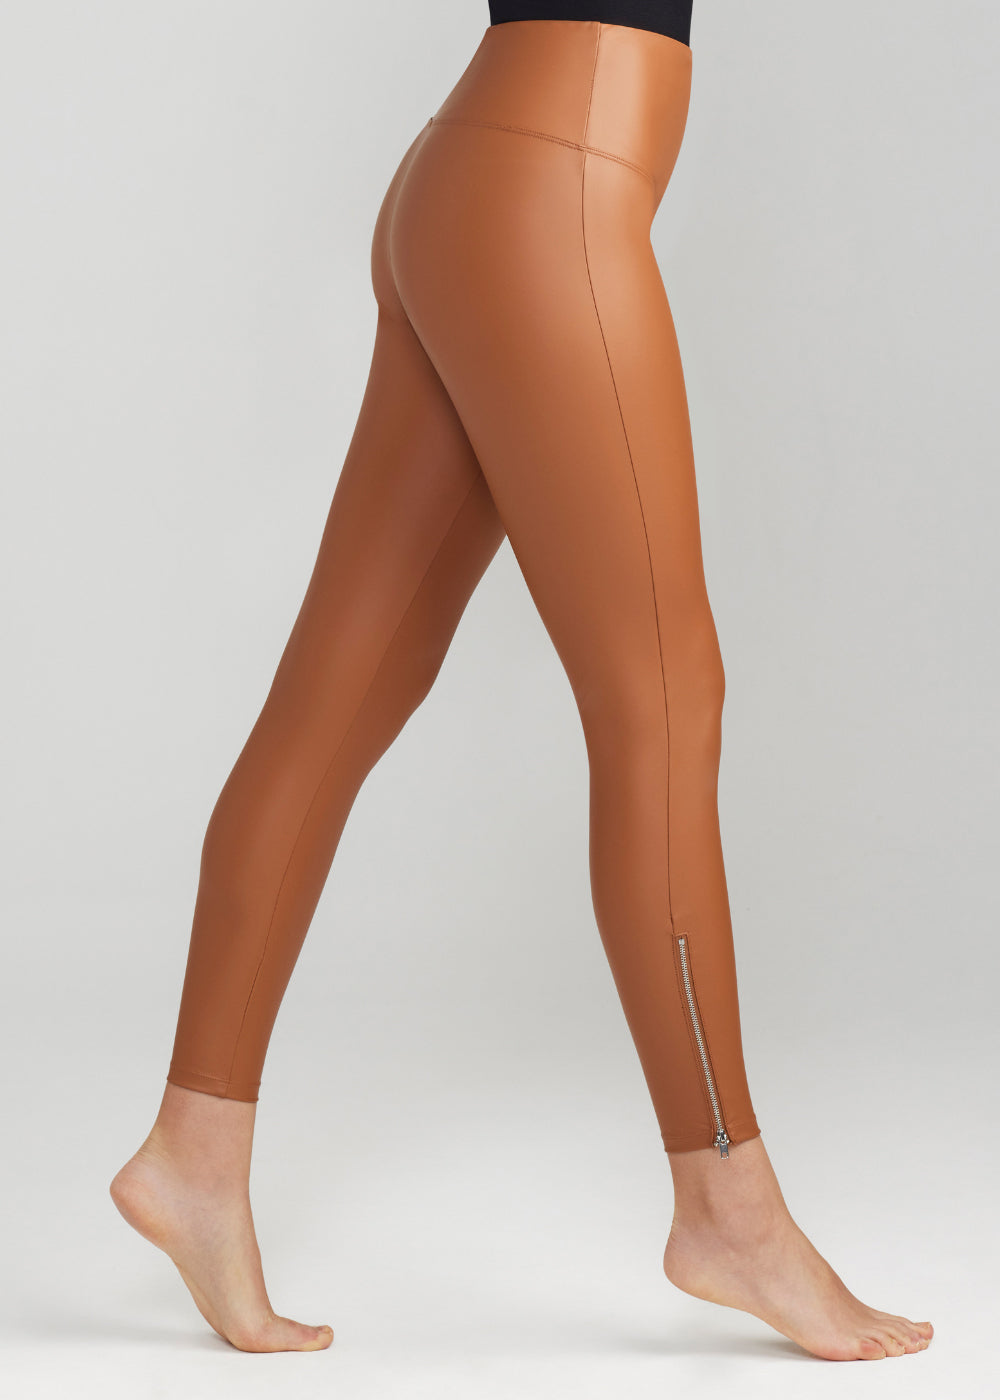 High Rise Faux Leather Leggings in Cream - Get great deals at JustFab